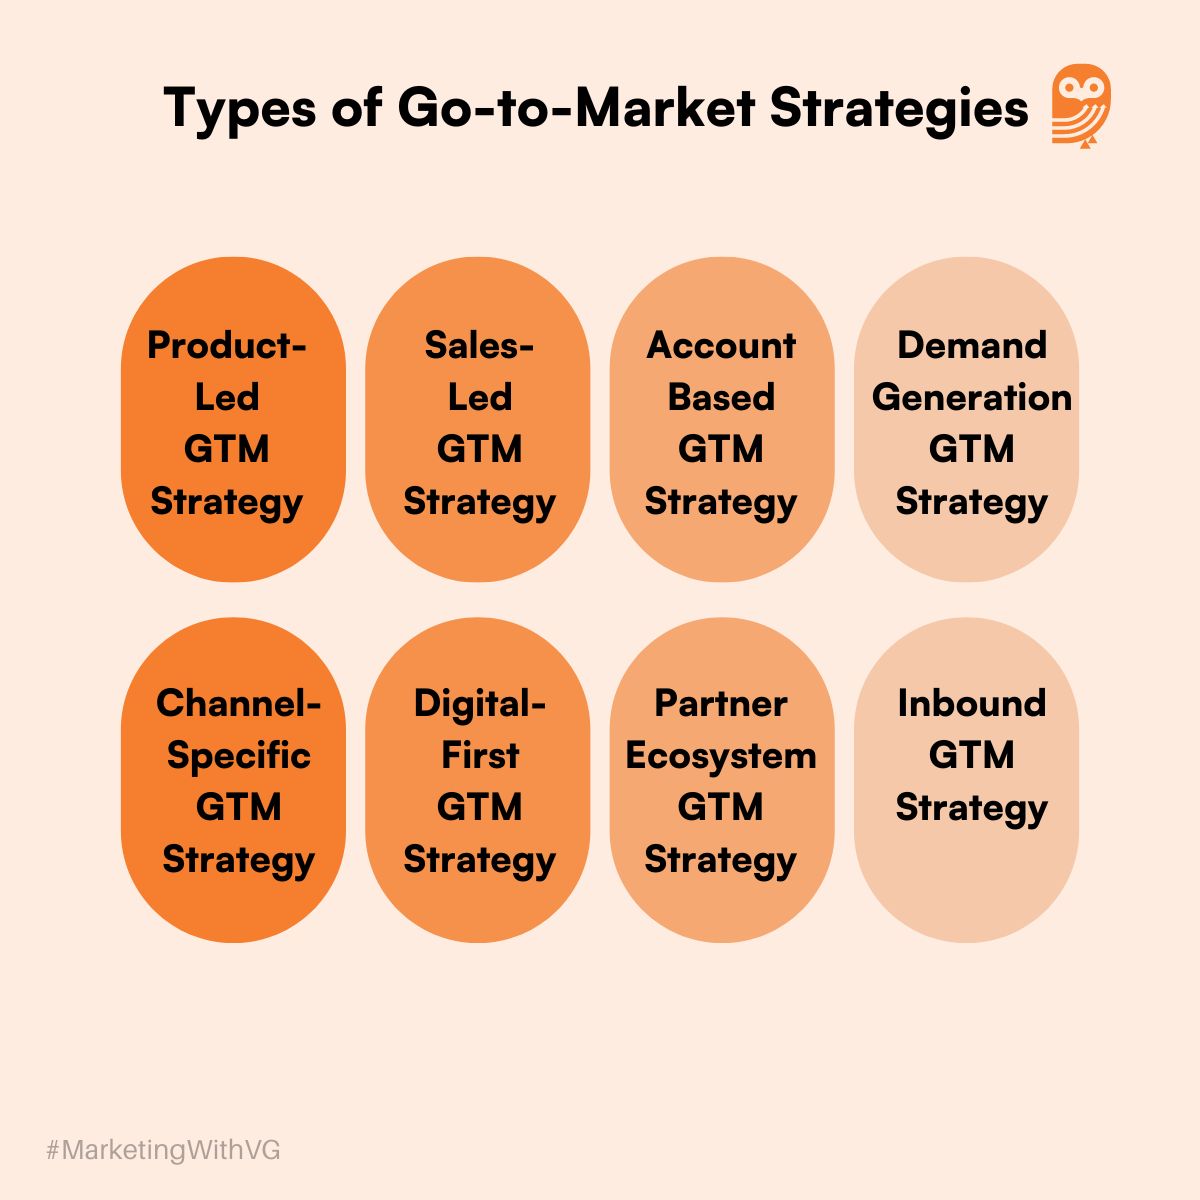 Types of Go-To-Market (GTM) strategies